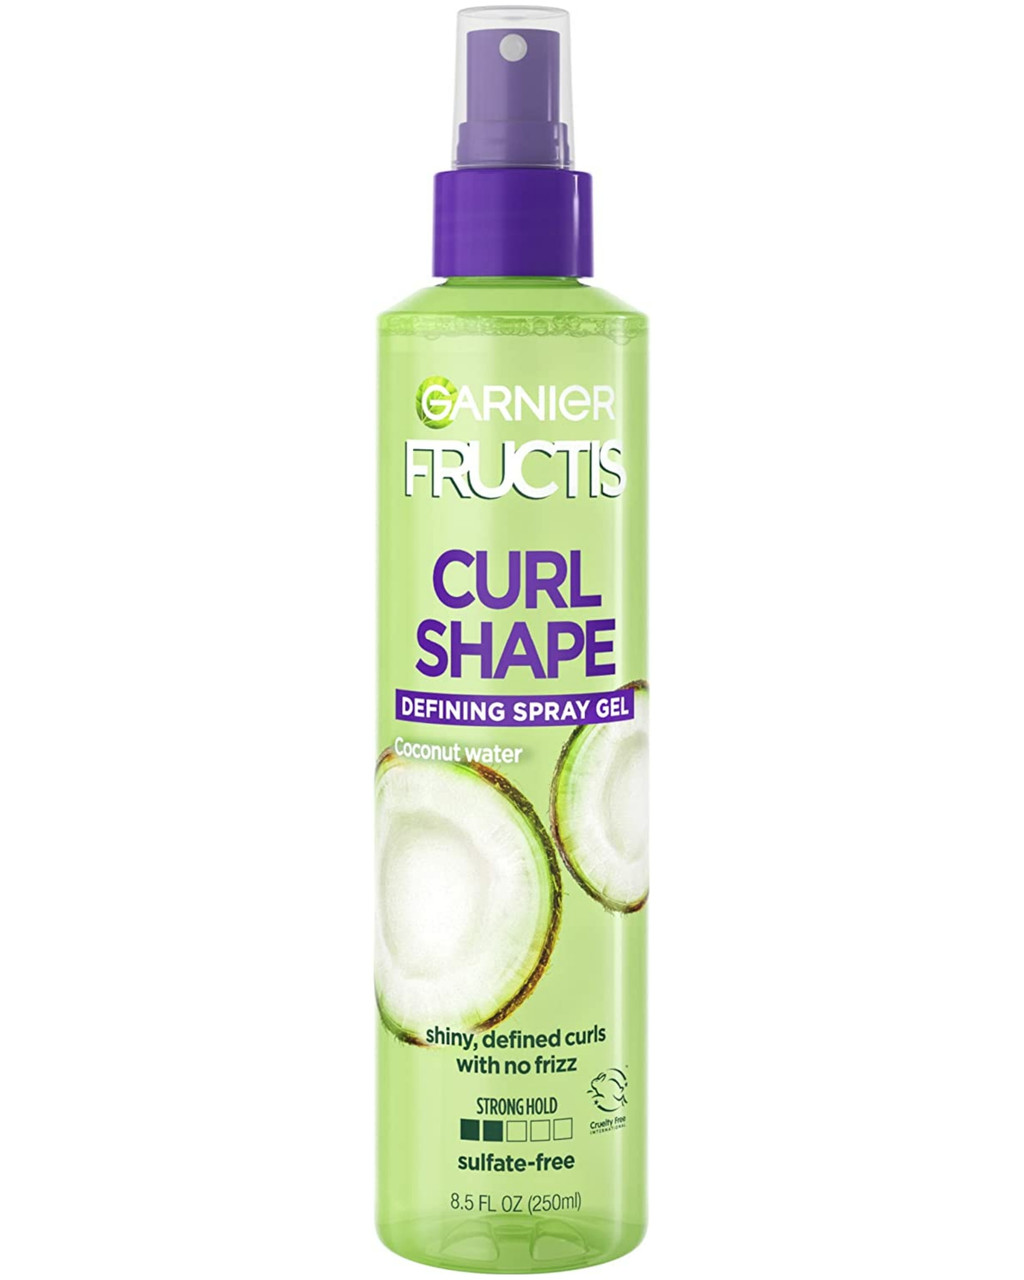 Garnier Fructis Curl Shape Defining Spray Gel, Coconut Water, 8.5 oz -  Whole And Natural